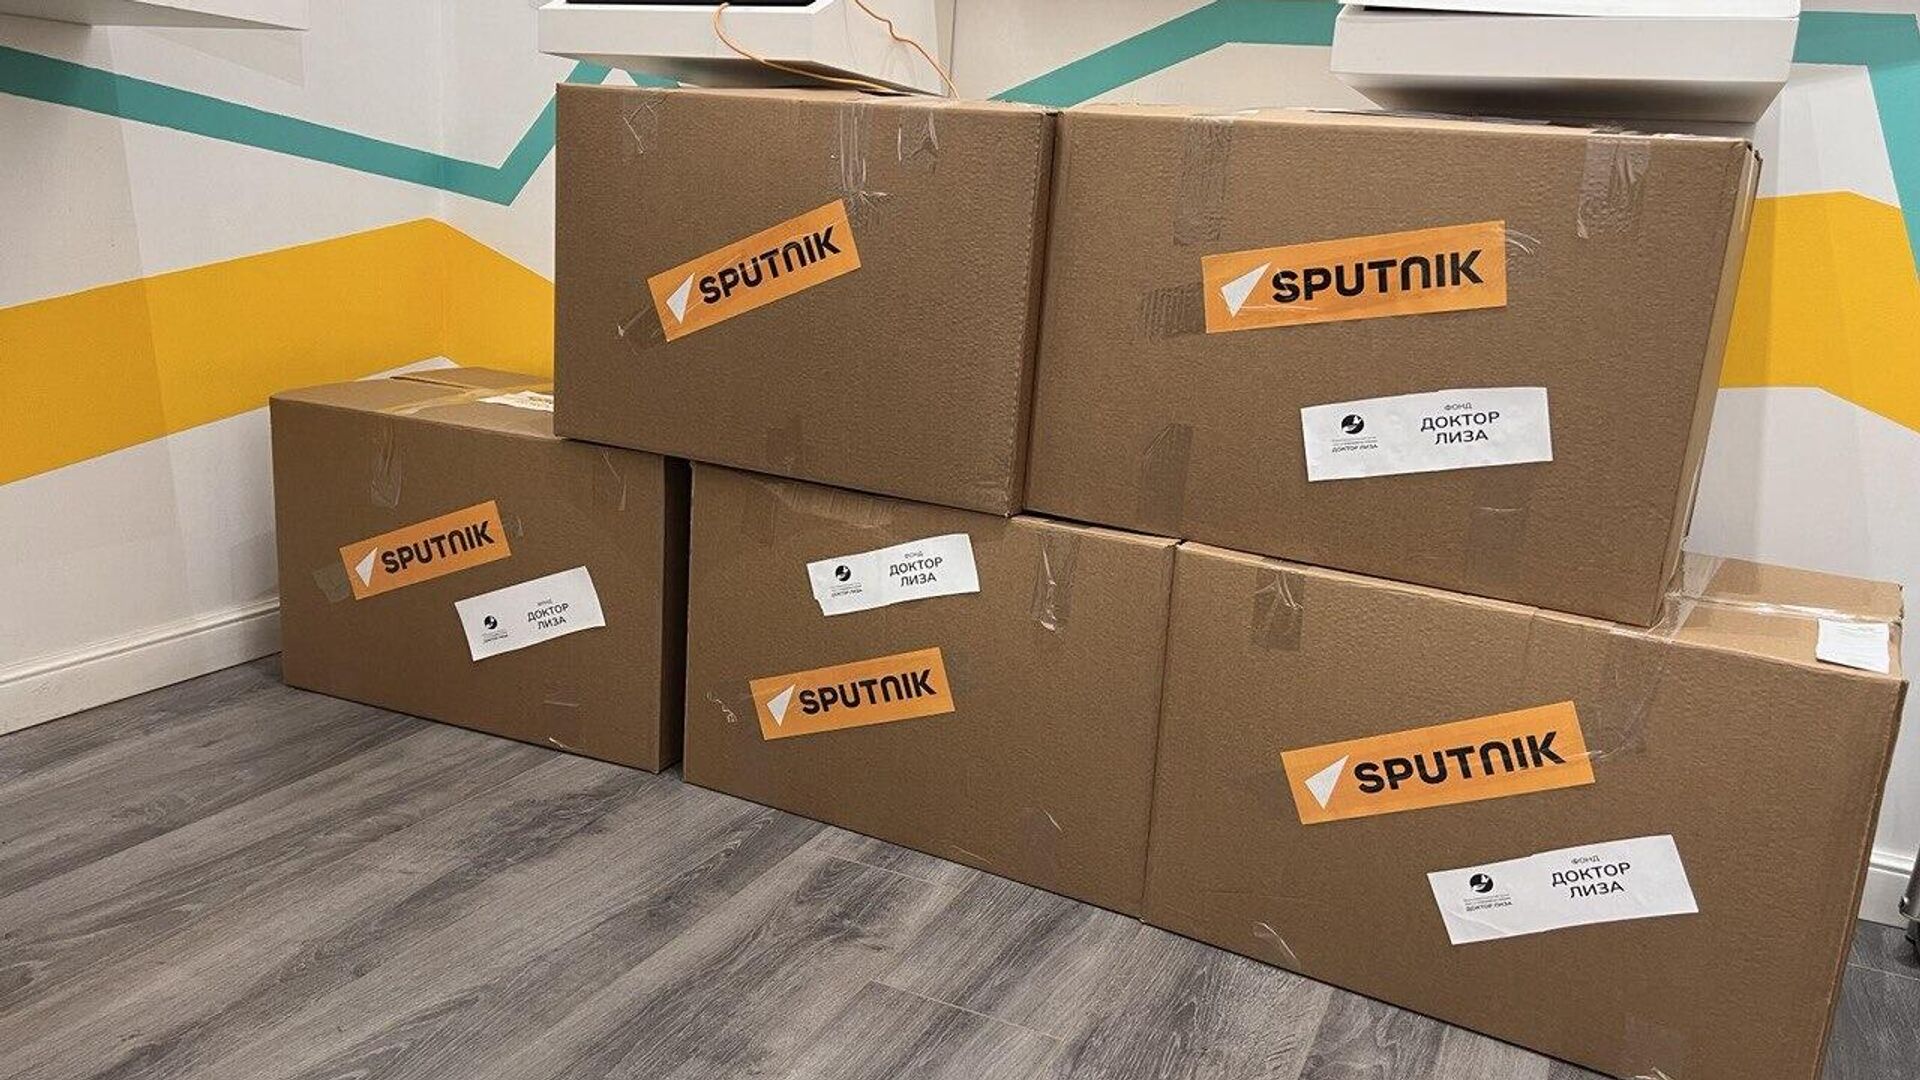 A humanitarian aid collection center was organized at the Sputnik facilities in Moscow for the victims of the earthquake in Syria. - Sputnik India, 1920, 10.02.2023